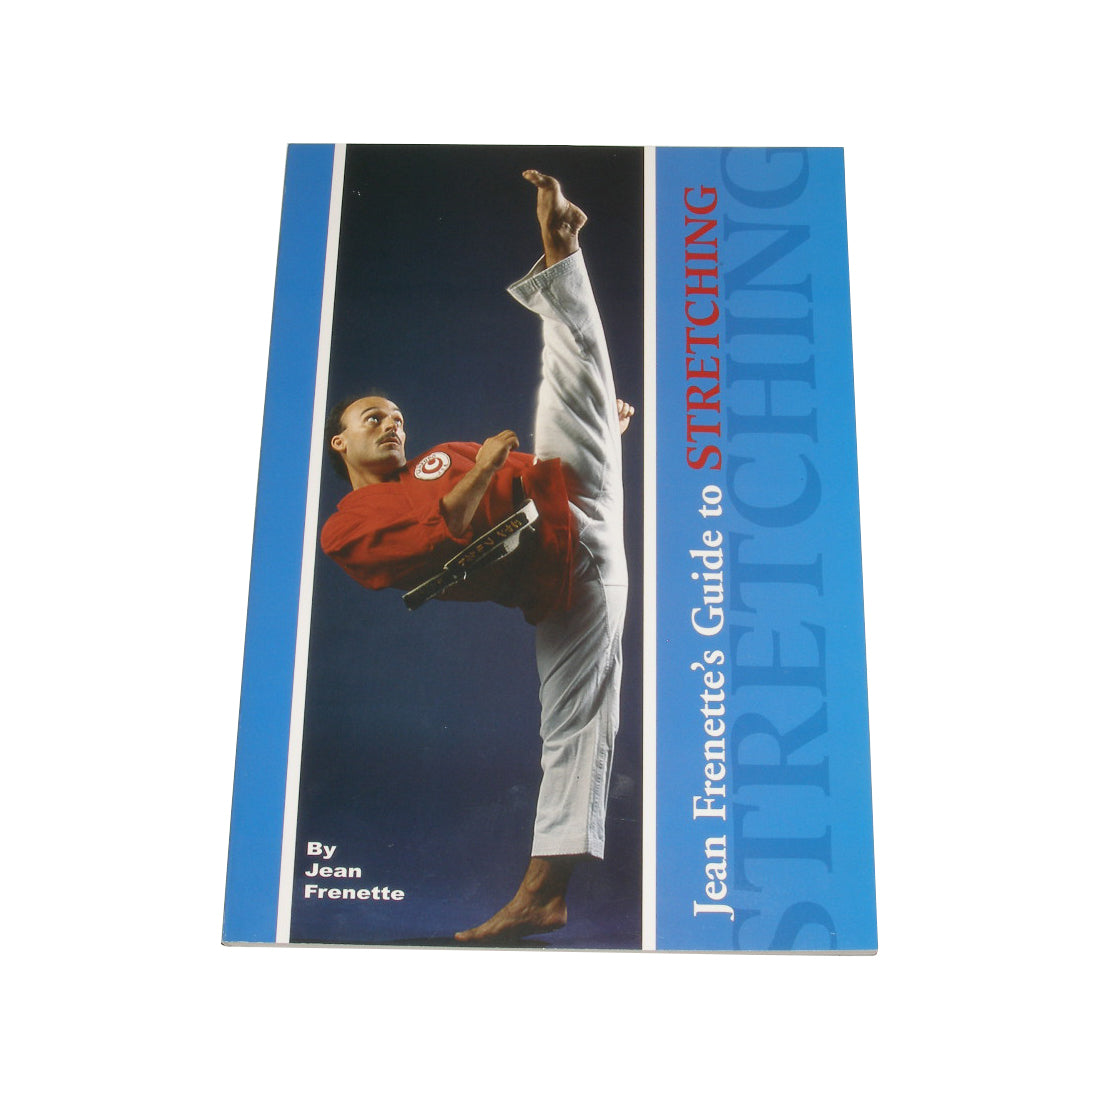 Jean Frenette's Complete Guide Stretching Book